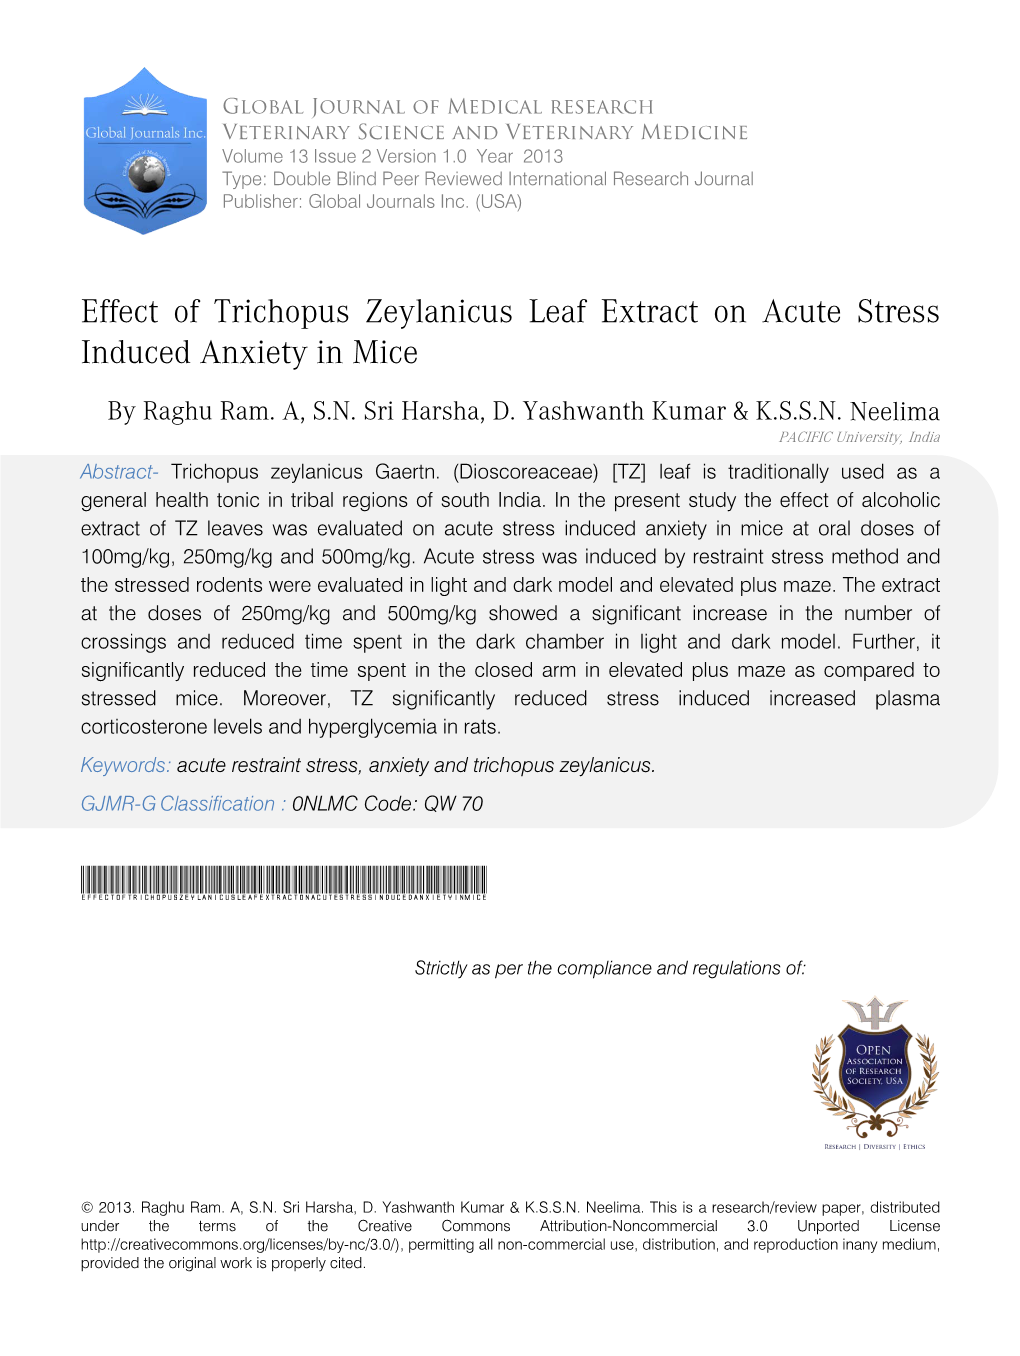 Effect of Trichopus Zeylanicus Leaf Extract on Acute Stress Induced Anxiety in Mice